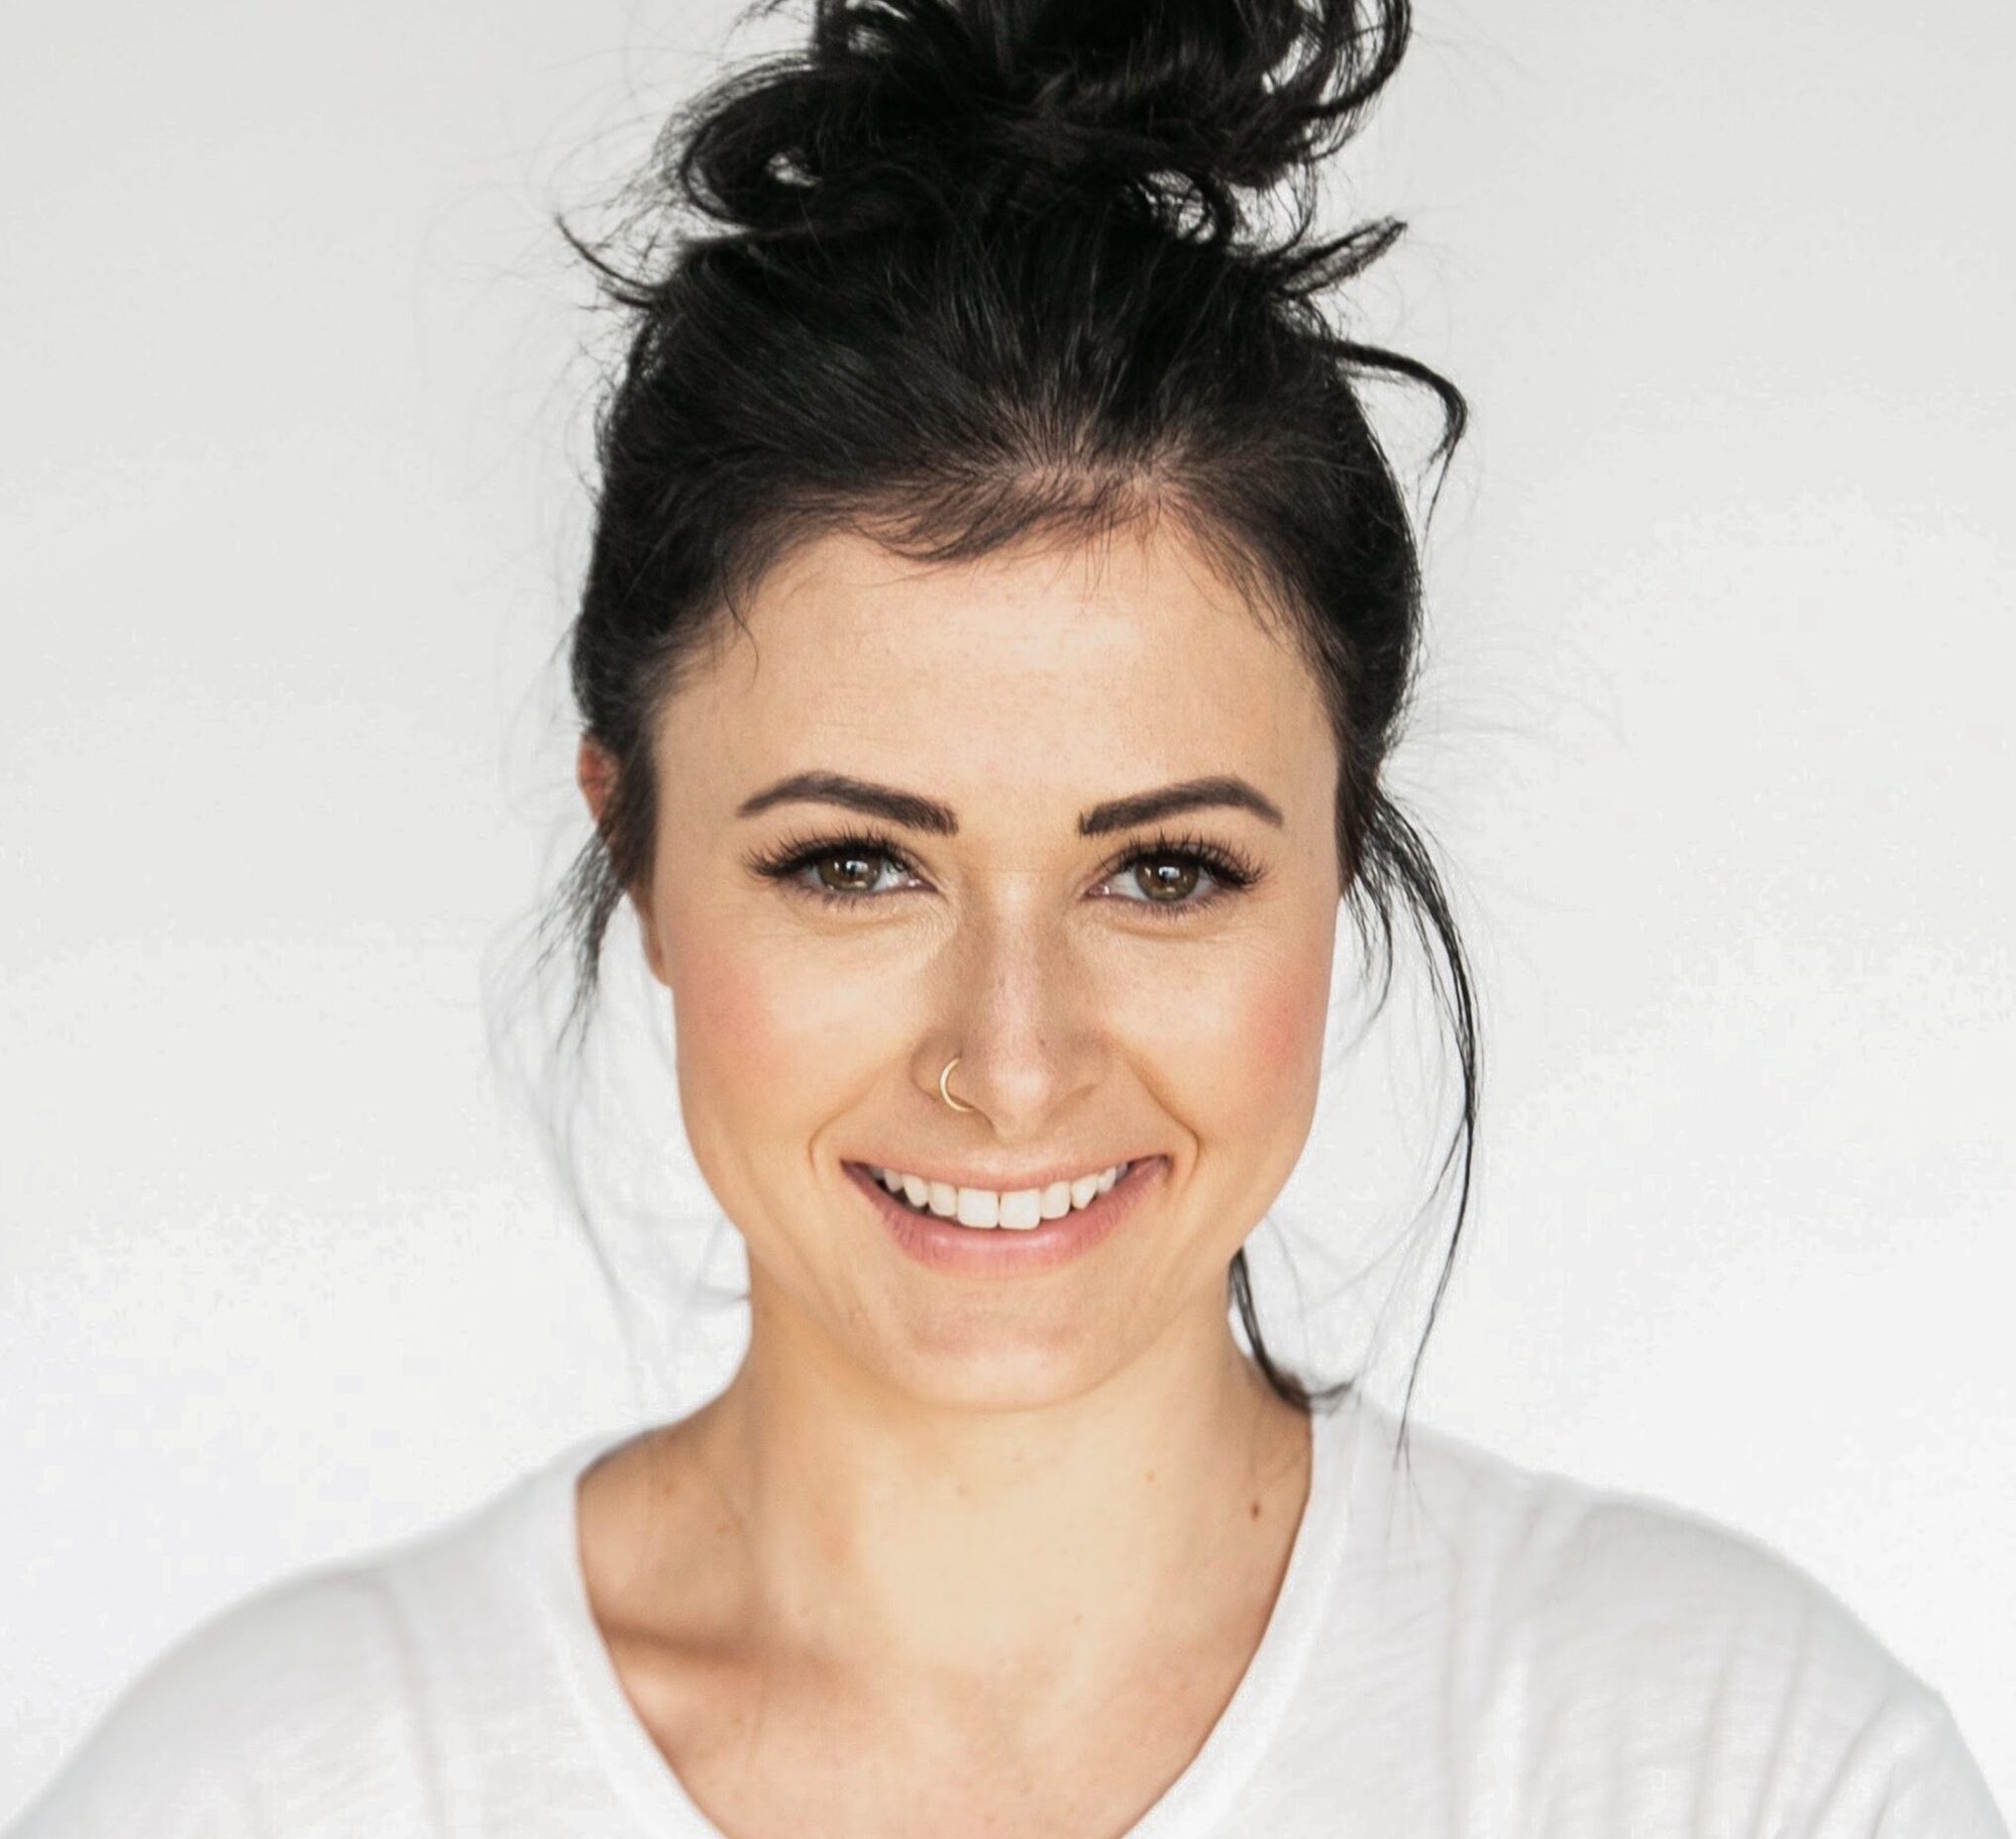 Young woman with black hair tied and nose ring smiling at camera